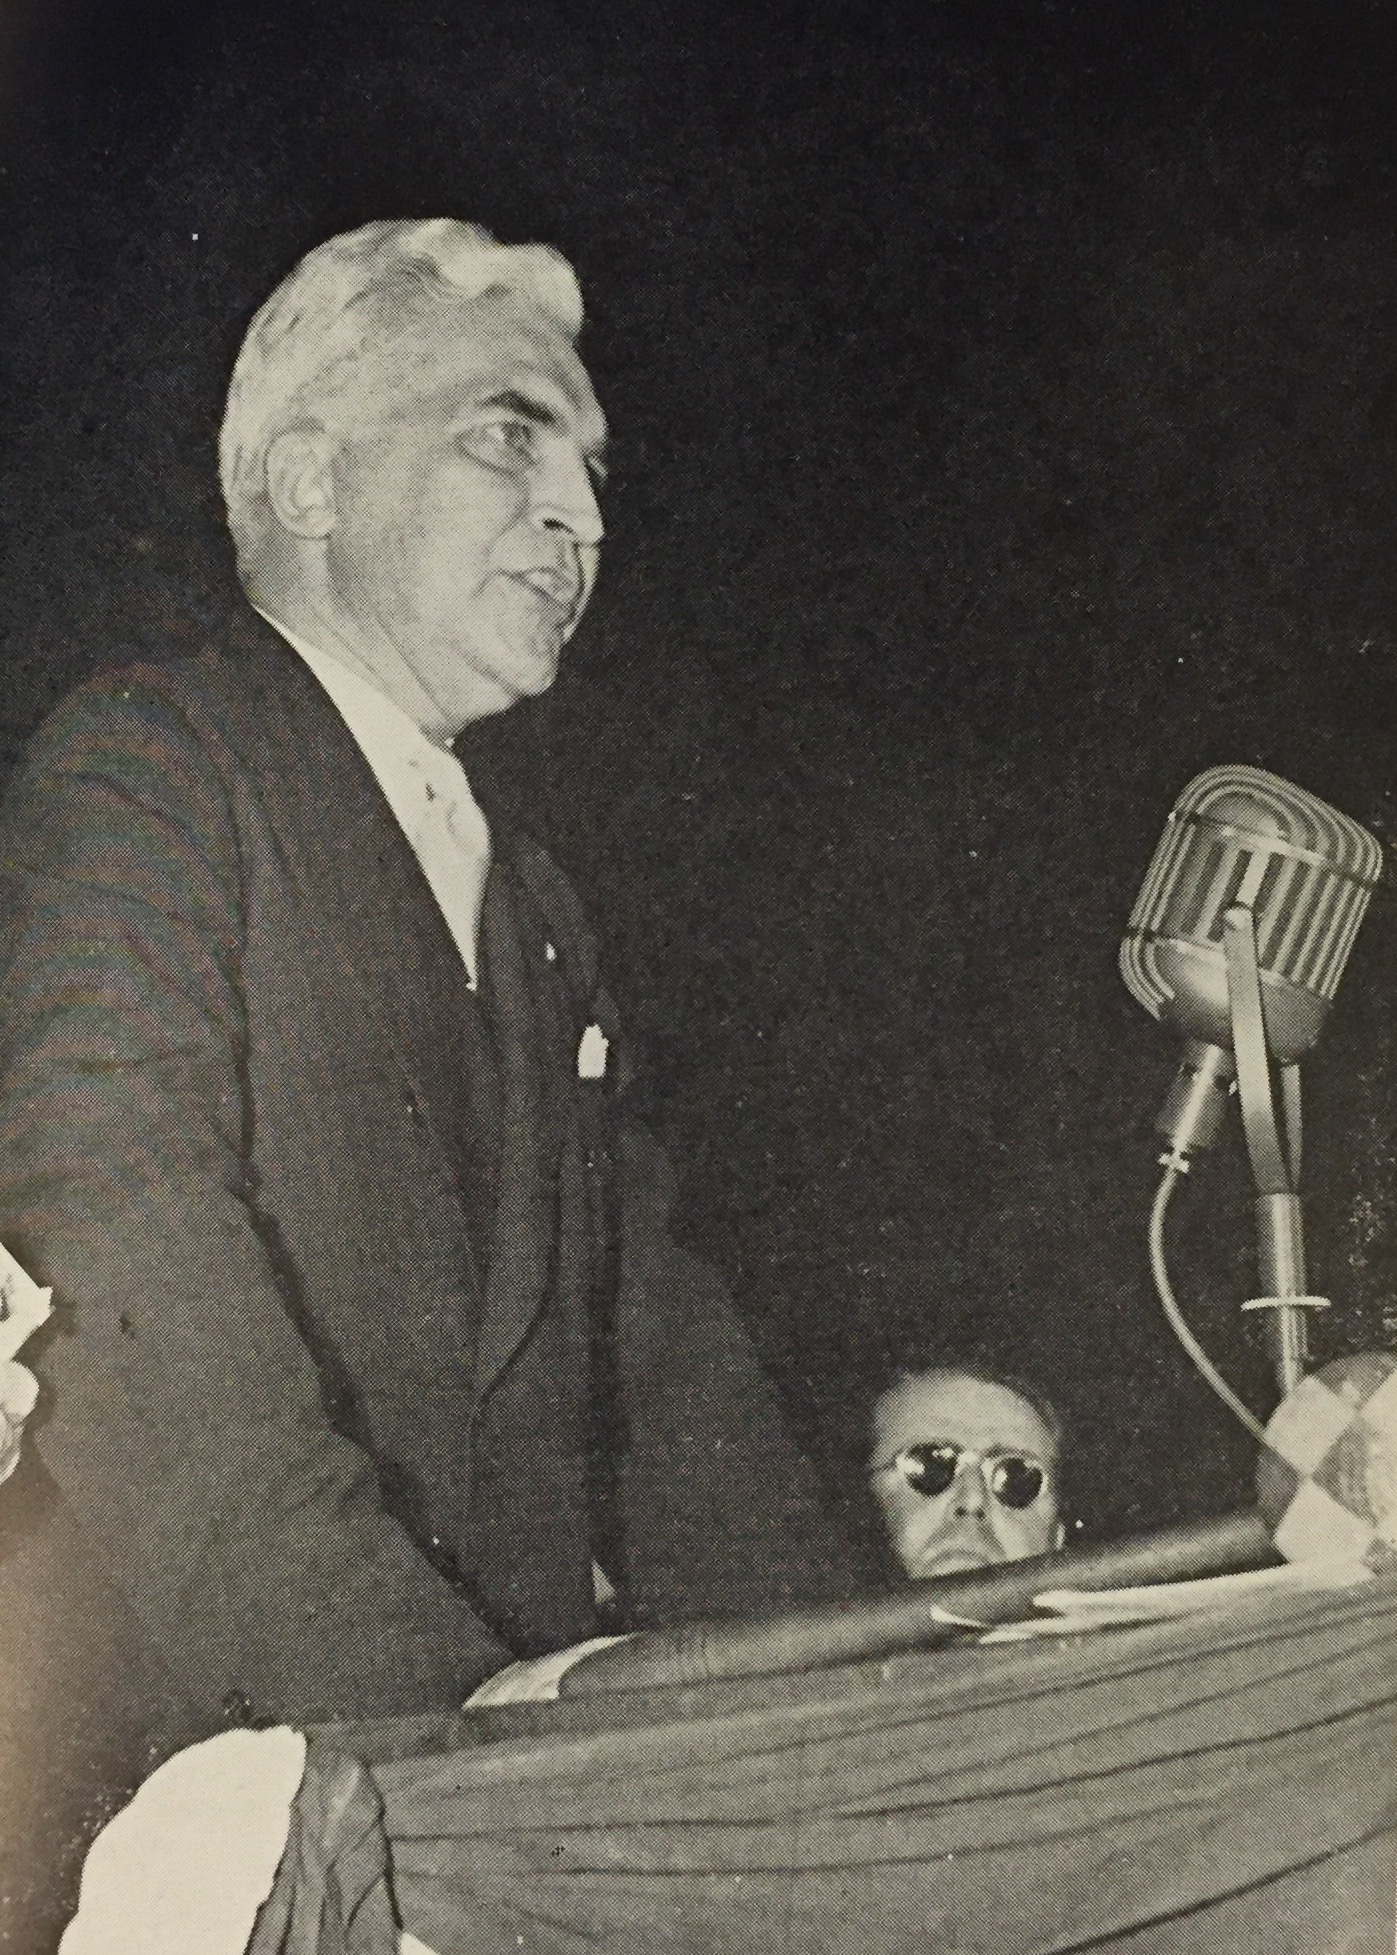 McNutt speaking before delegates of the 1940 Presidential Election. After Roosevelt decided to run for a third term, McNutt withdrew his consideration for the nomination. Image courtesy of Mrs. Roy Garrett Watson/I. George Blake. 